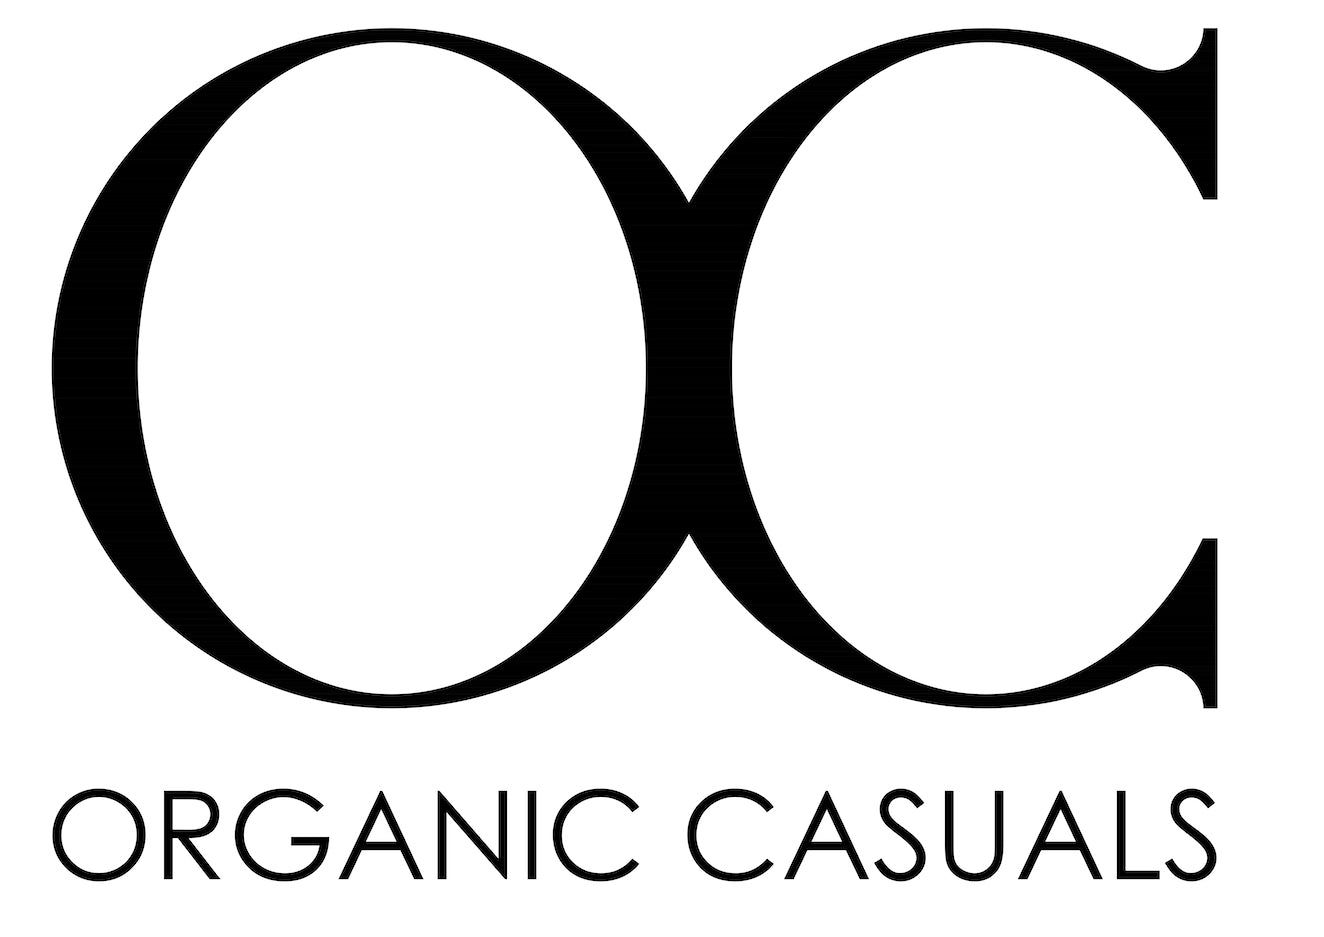 Load video: Organic Casuals - Products